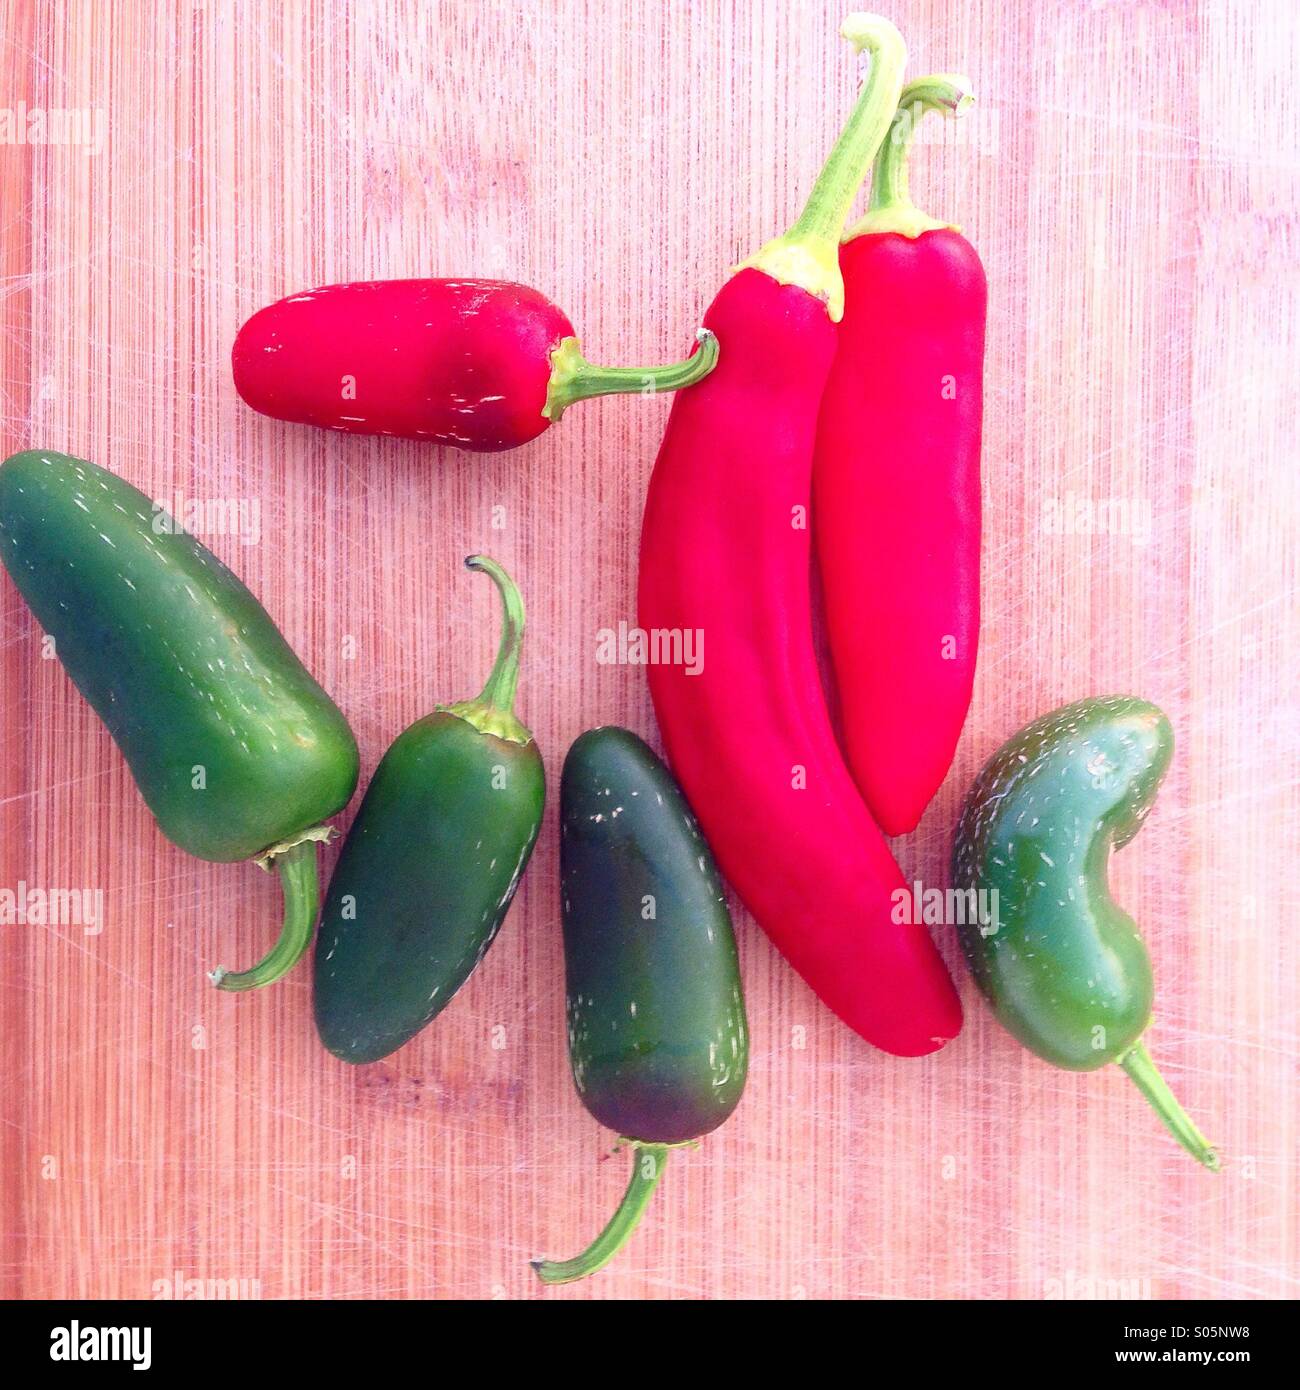 Green jalapeno and chili peppers Stock Photo